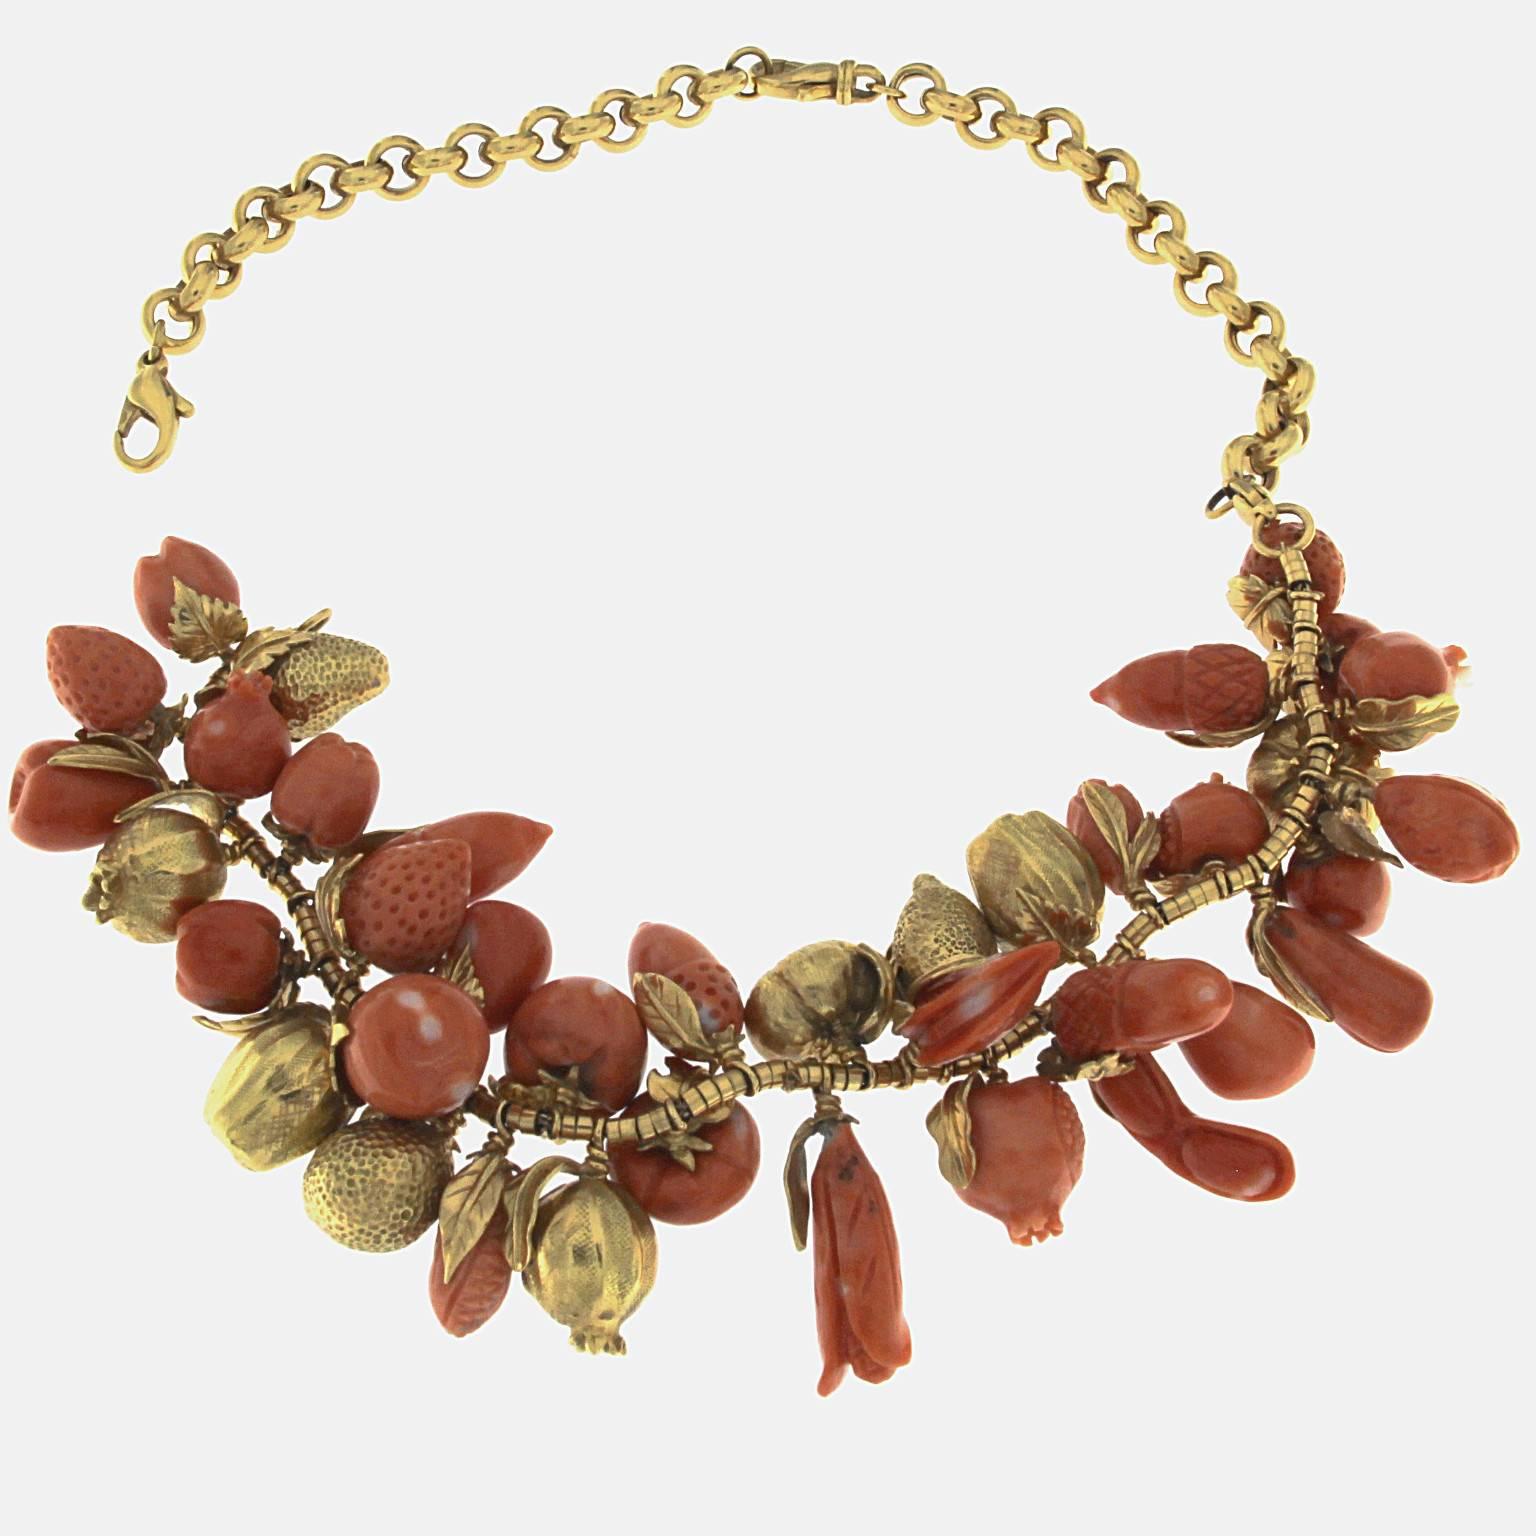 Coral and 18kt yellow gold fruit necklace
The front part can be worn as a bracelet taking out the back since it has 2 clasps. 
Total weight of 18 kt gold: gr 124,70
Total weight of red coral: gr 66.00
Stamp: 10 MI, 750, ITALY